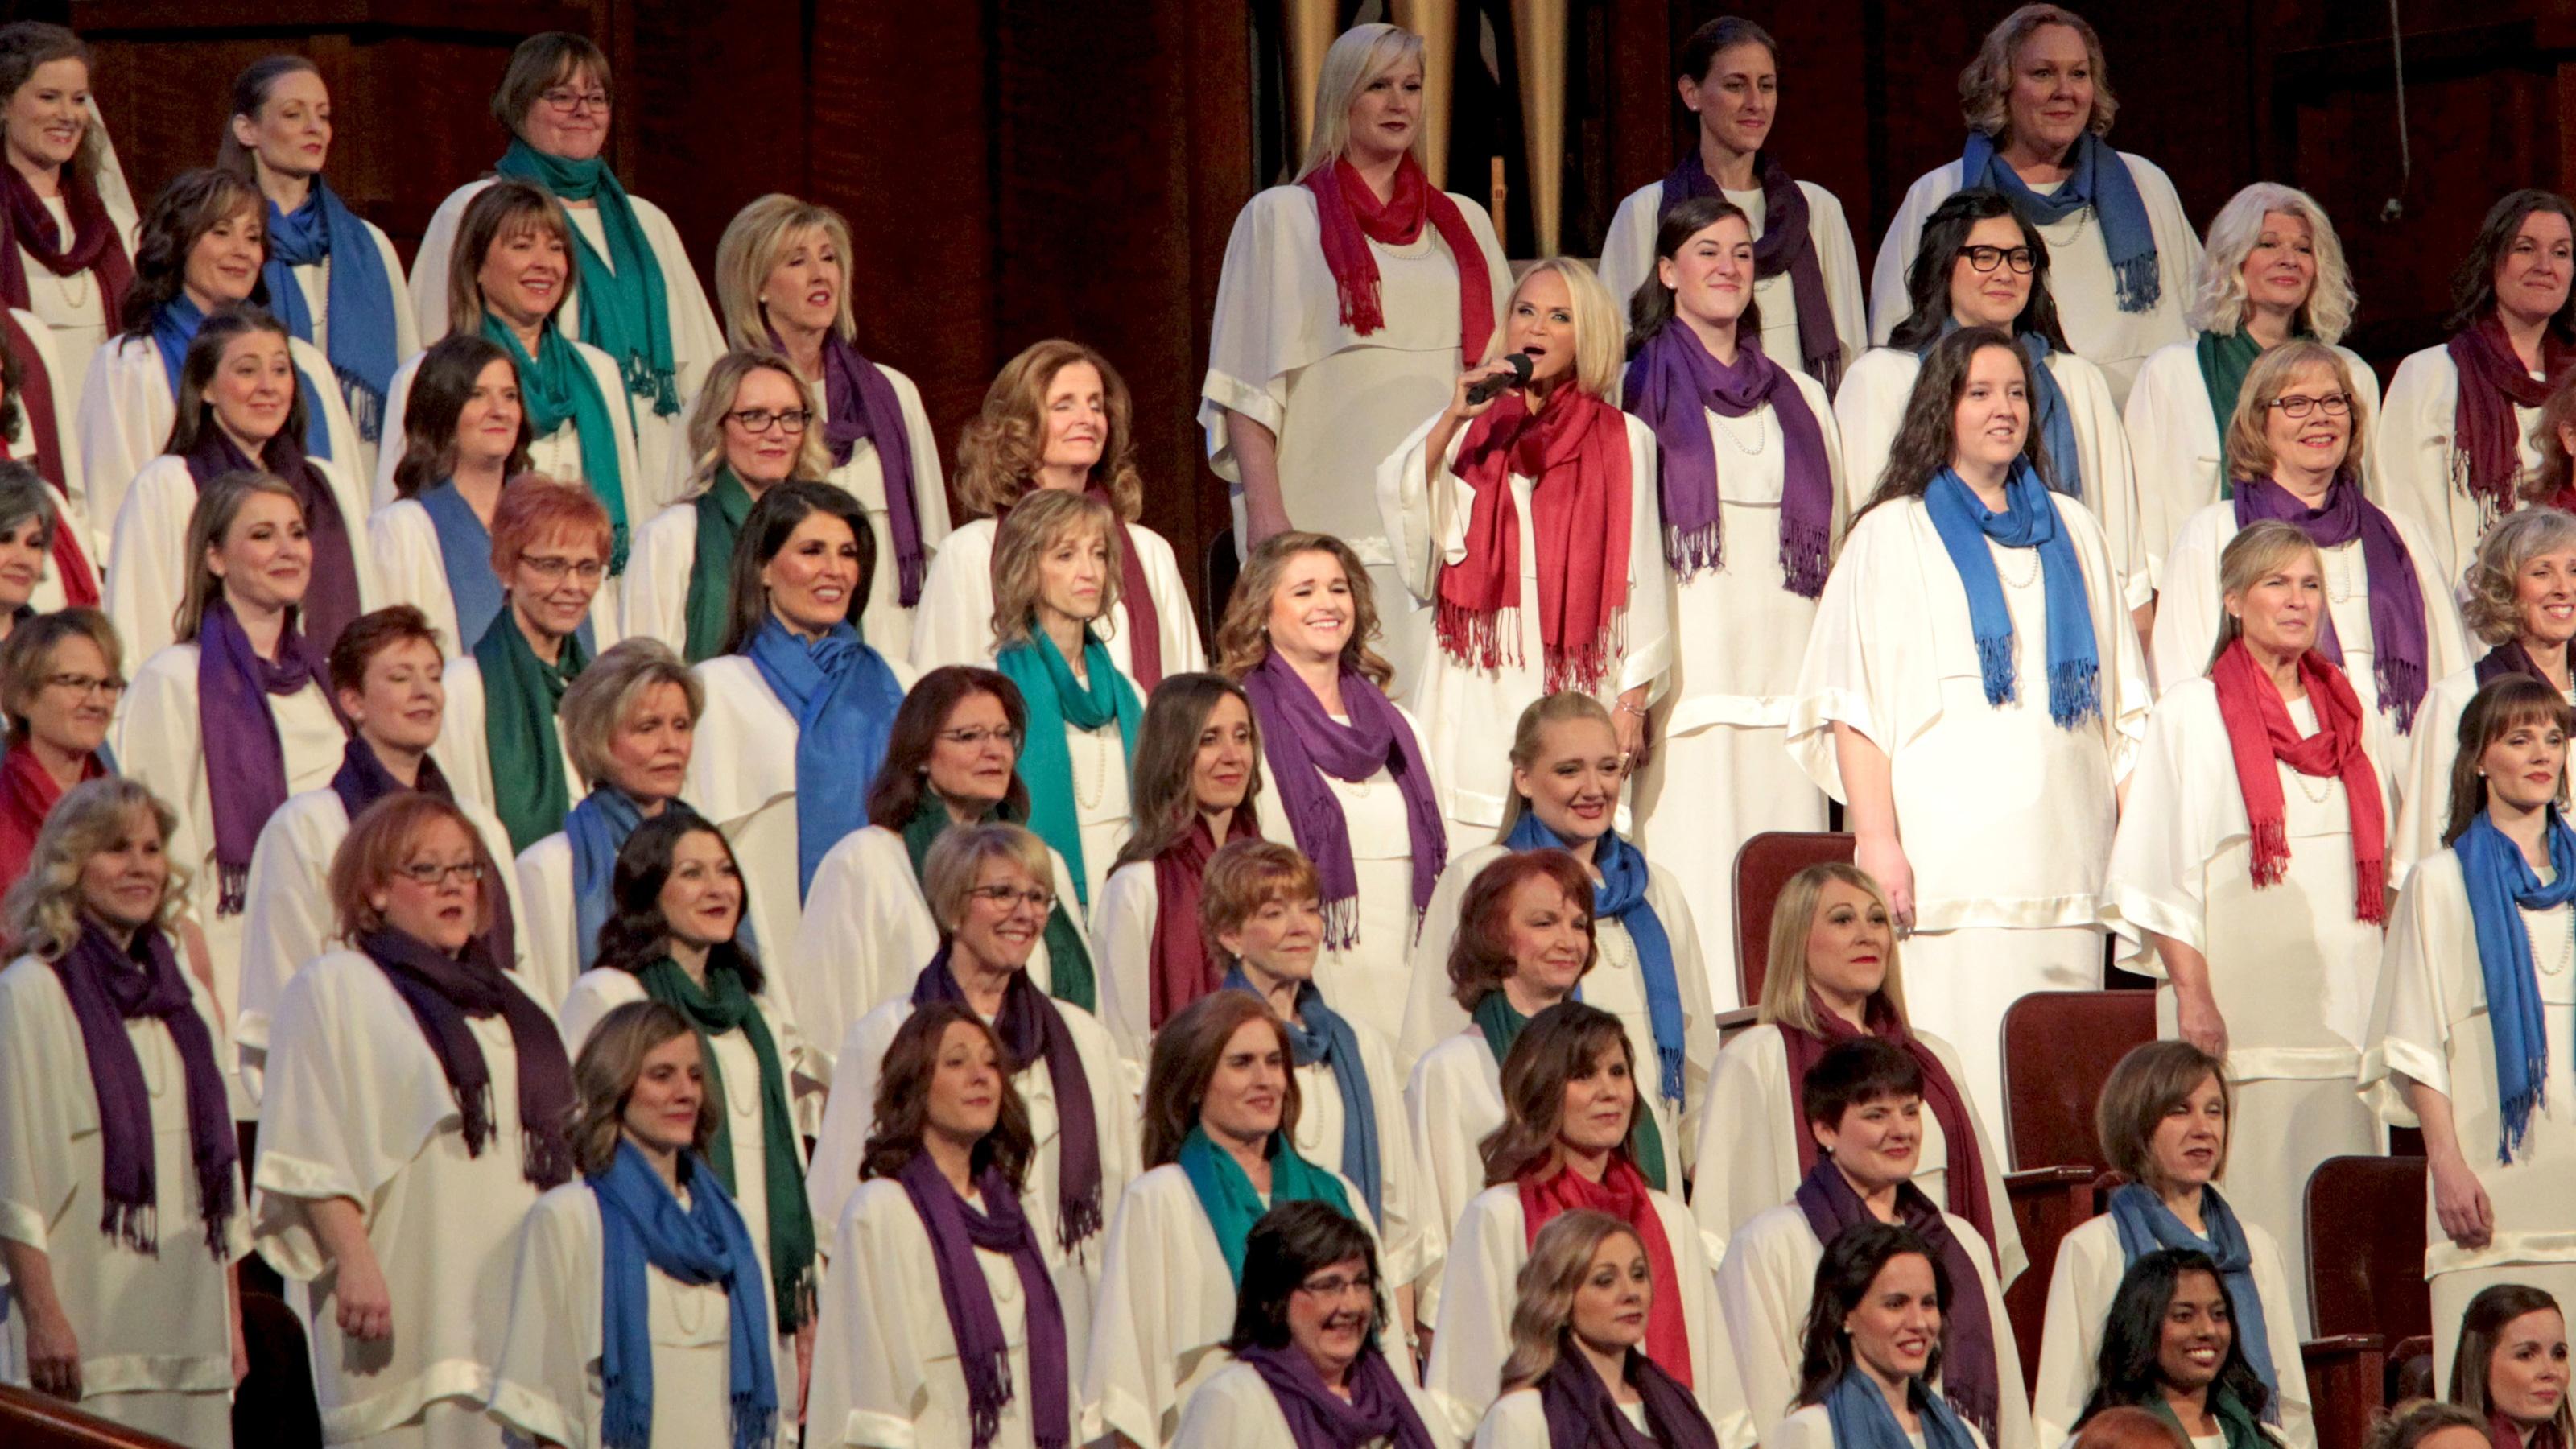 Kristin Chenoweth sings into a microphone amidst the female members of The Tabernacle Choir, who are all dressed in white with single-color scarves.